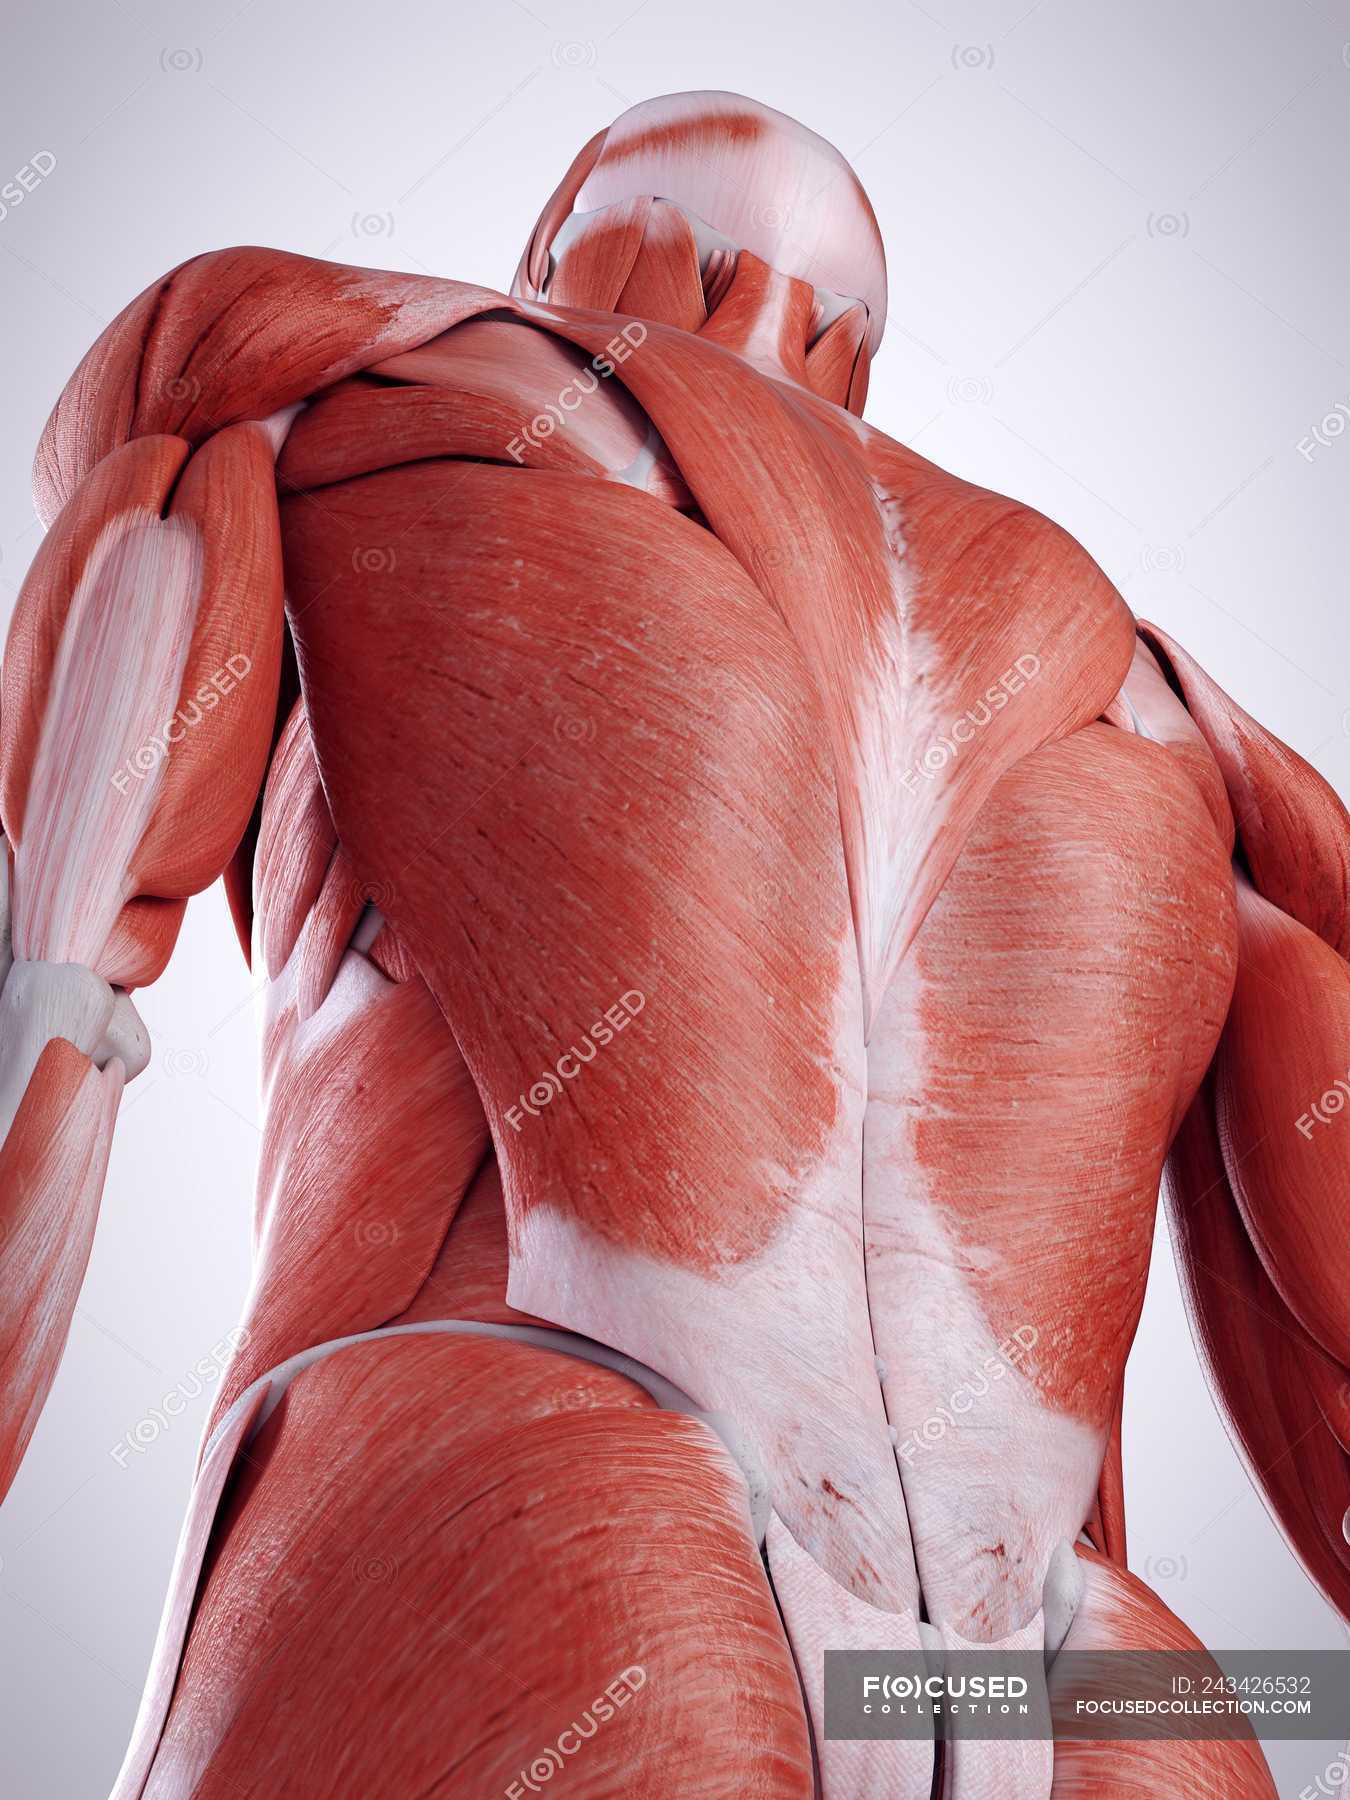 3d Rendered Illustration Of Back Muscles In Human Body Structure Biological Stock Photo 243426532